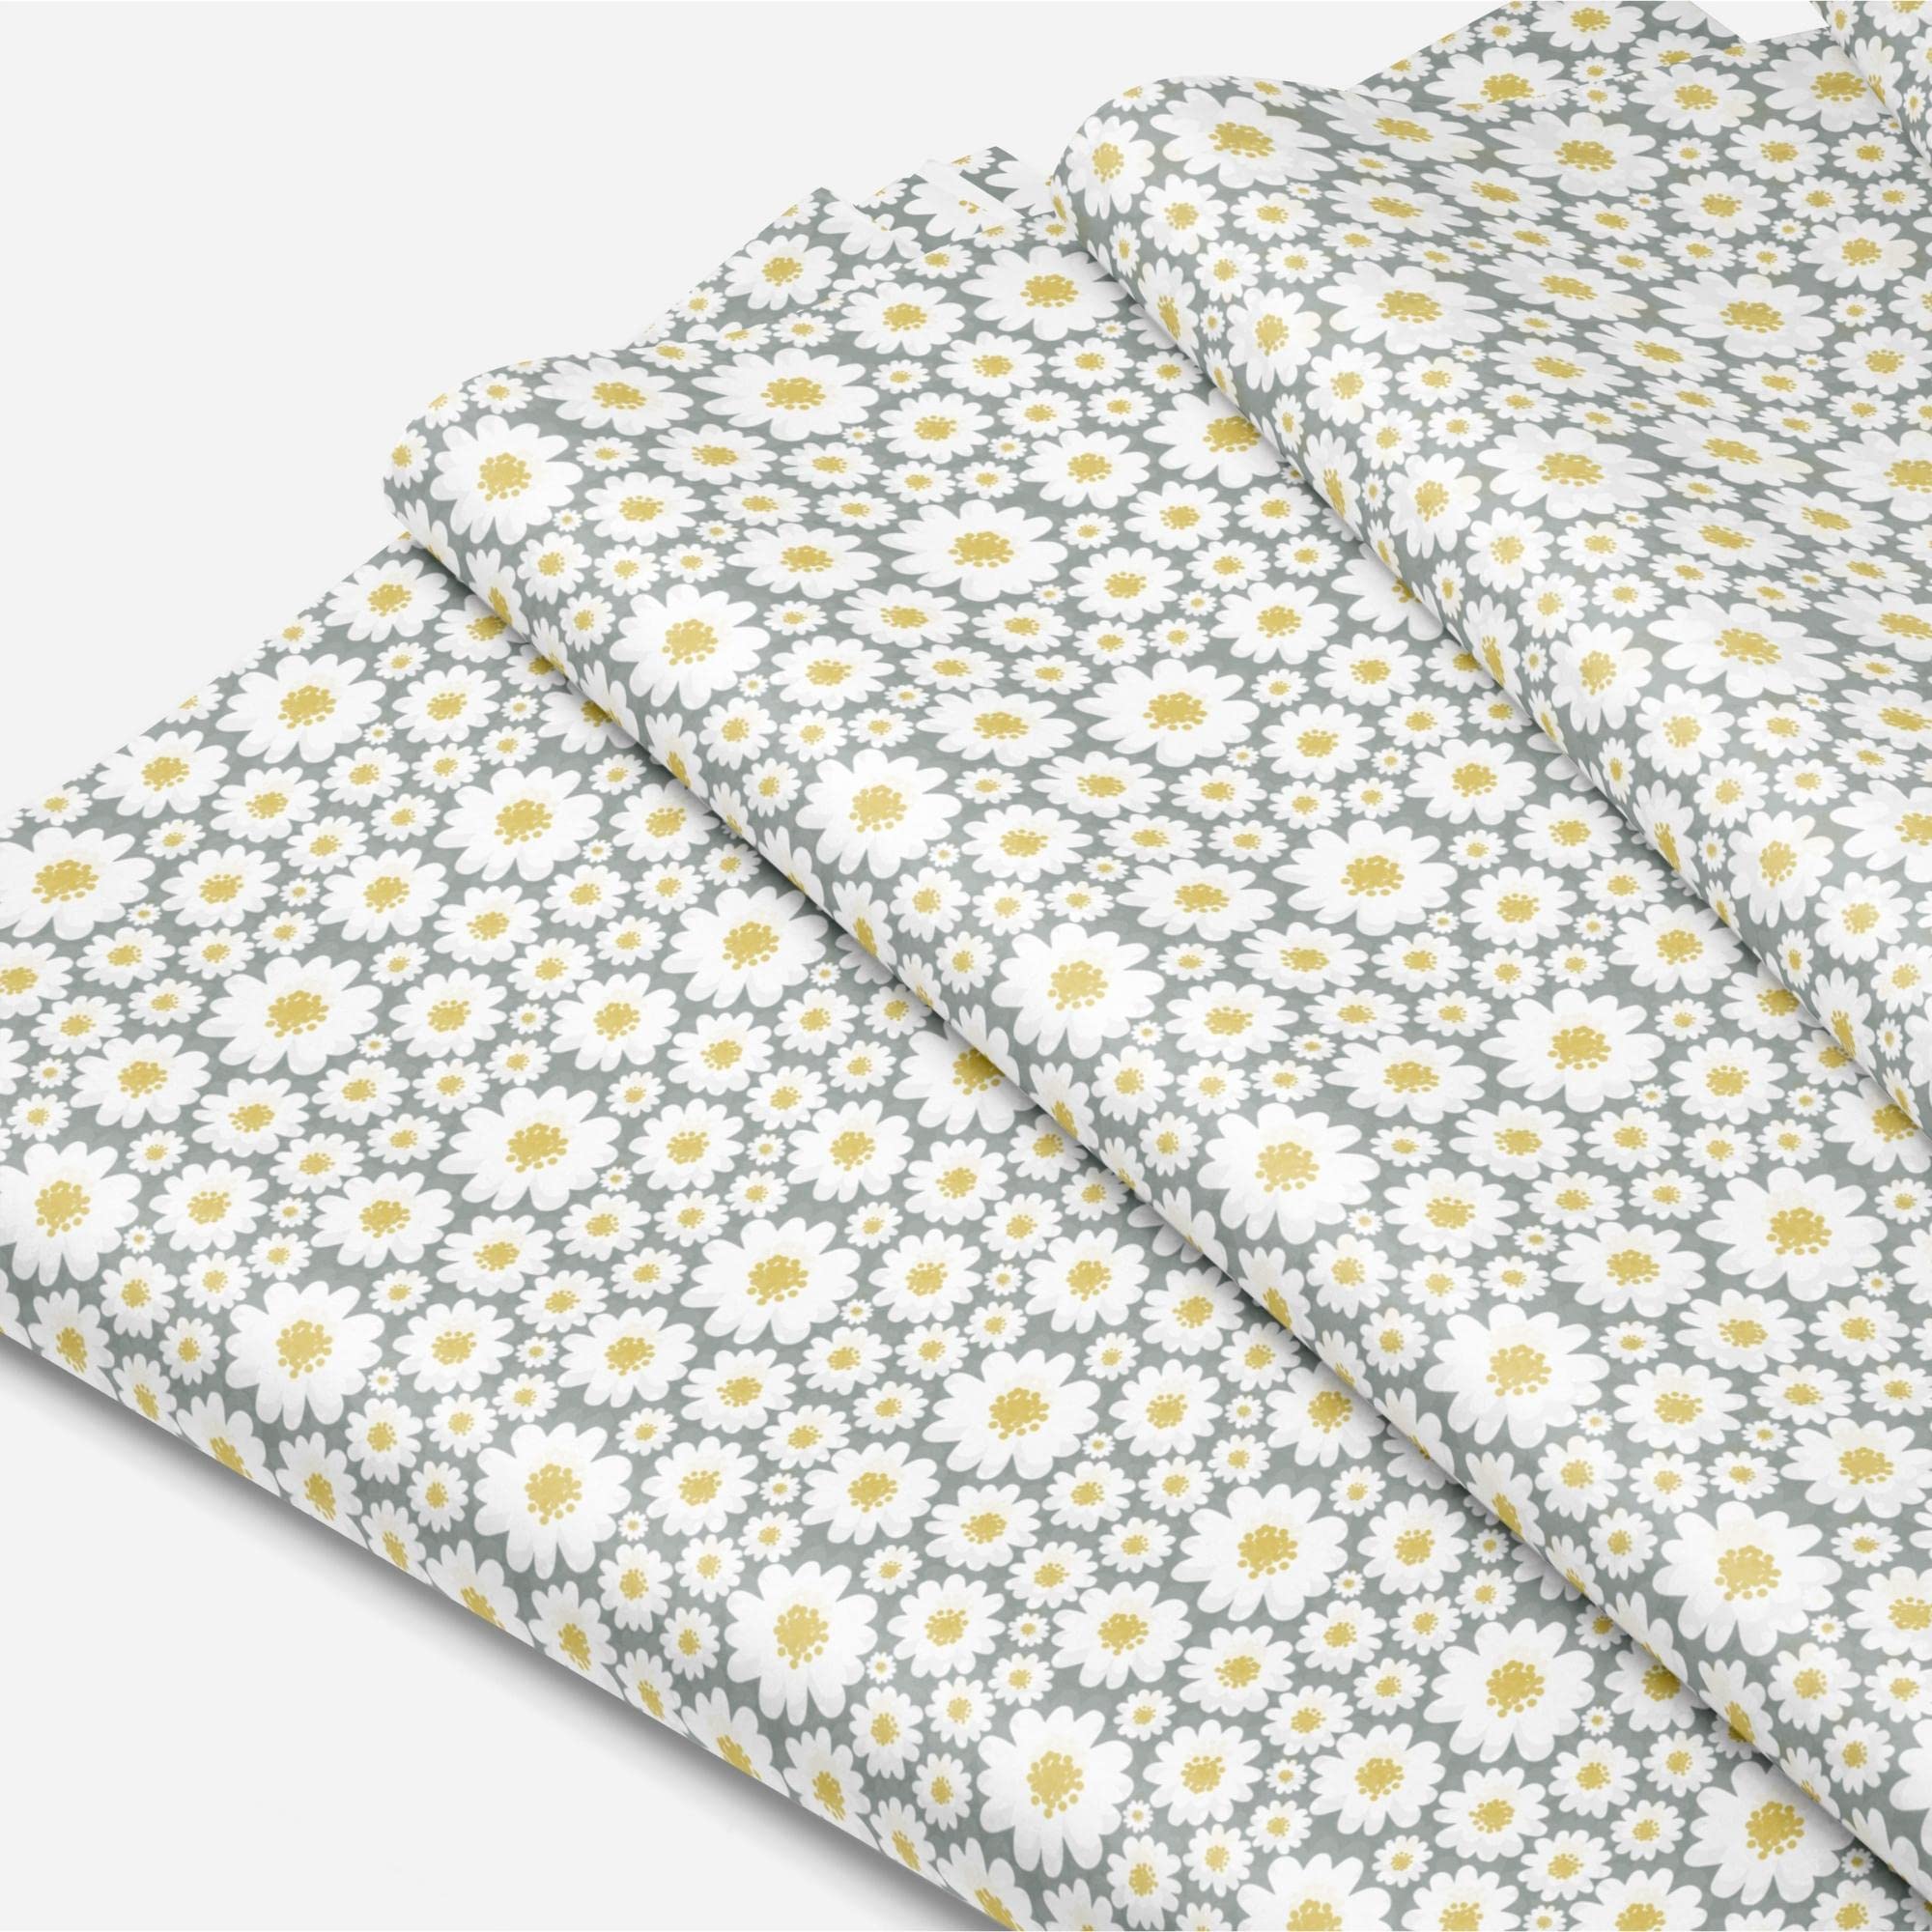 Daisy Floral Tissue Paper (100 Sheets, 20x30 inch)